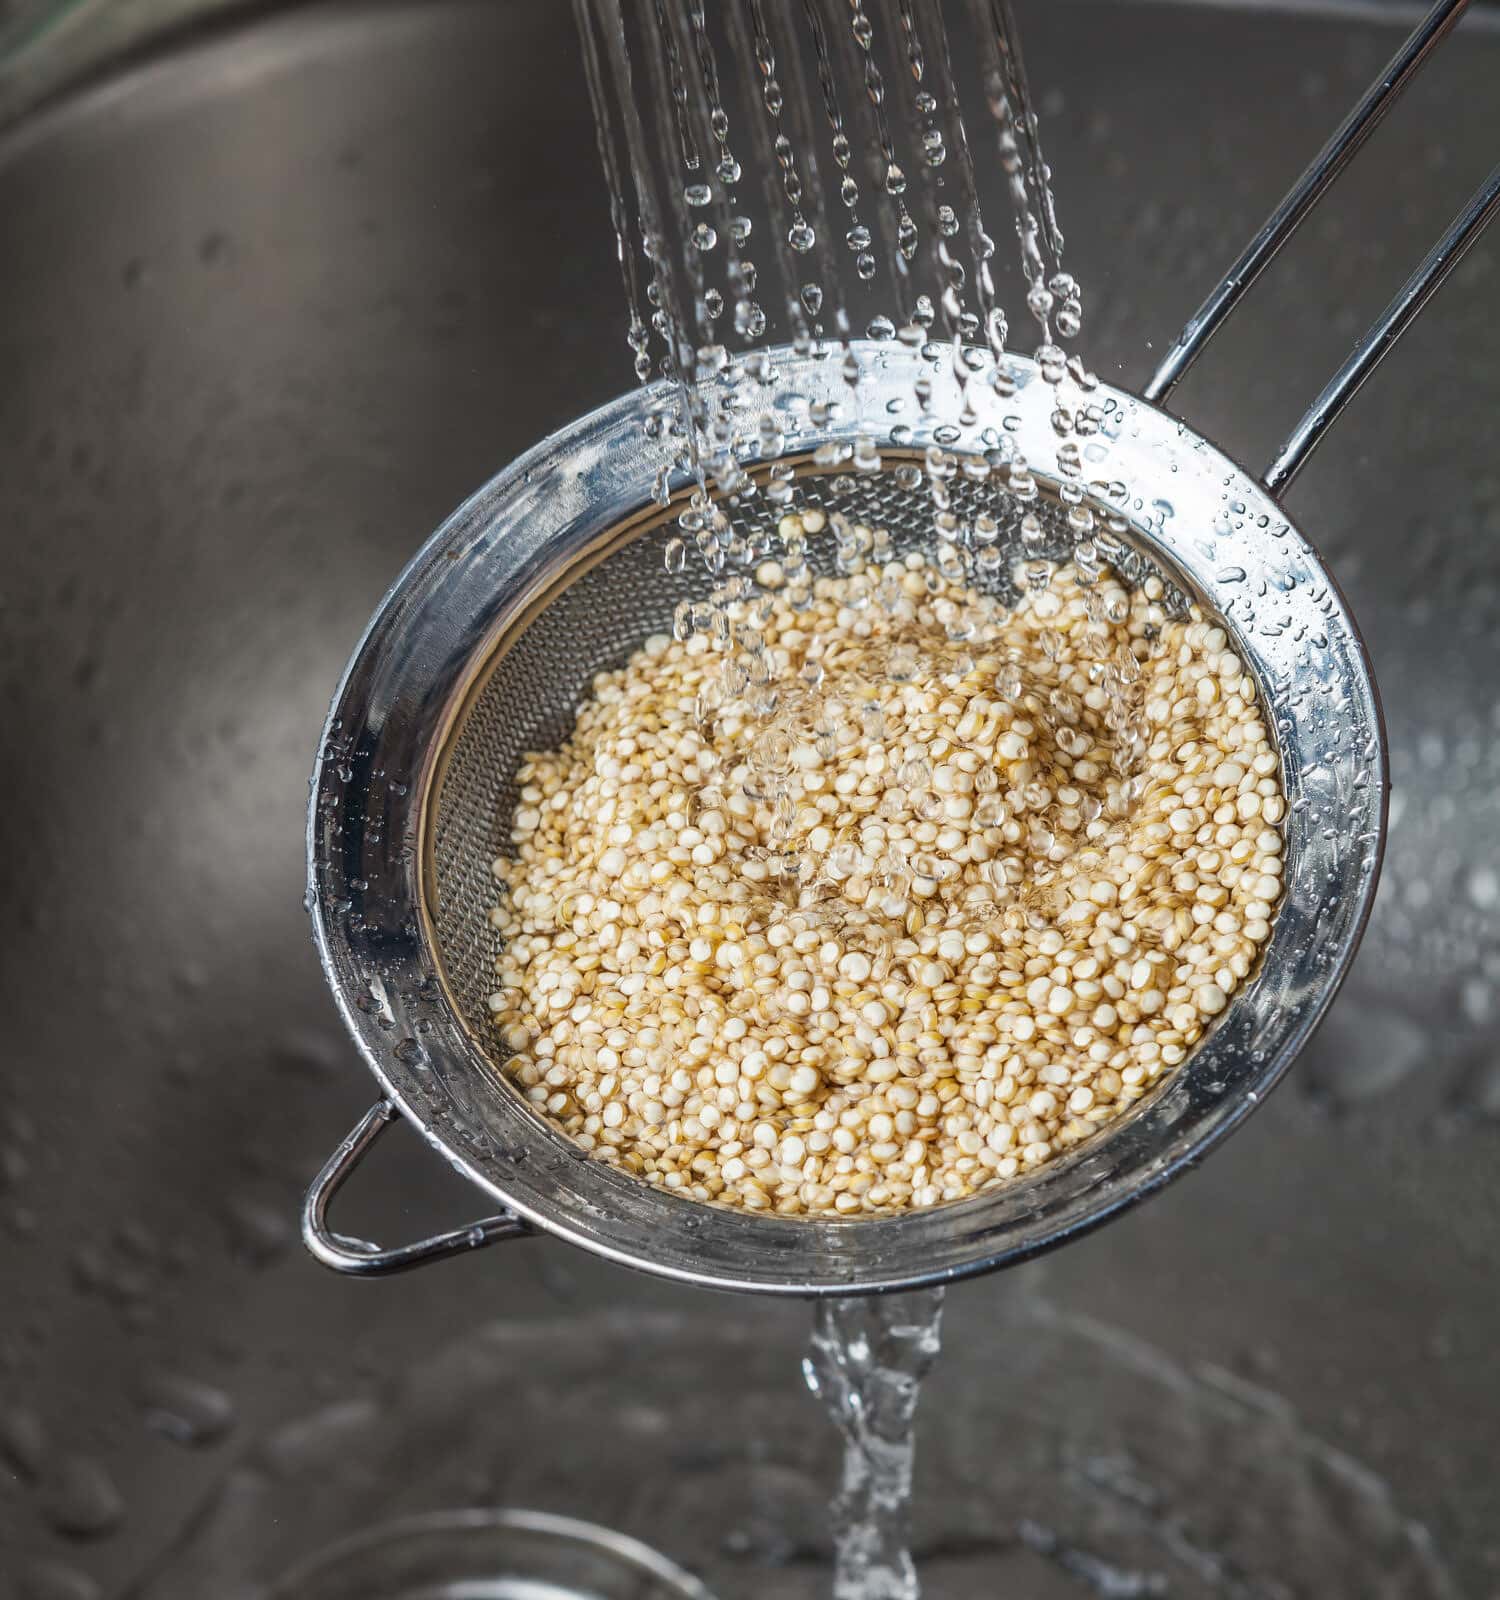 Small strainer with raw quinoa seeds and rinsing it in cold water in the kitchen sink